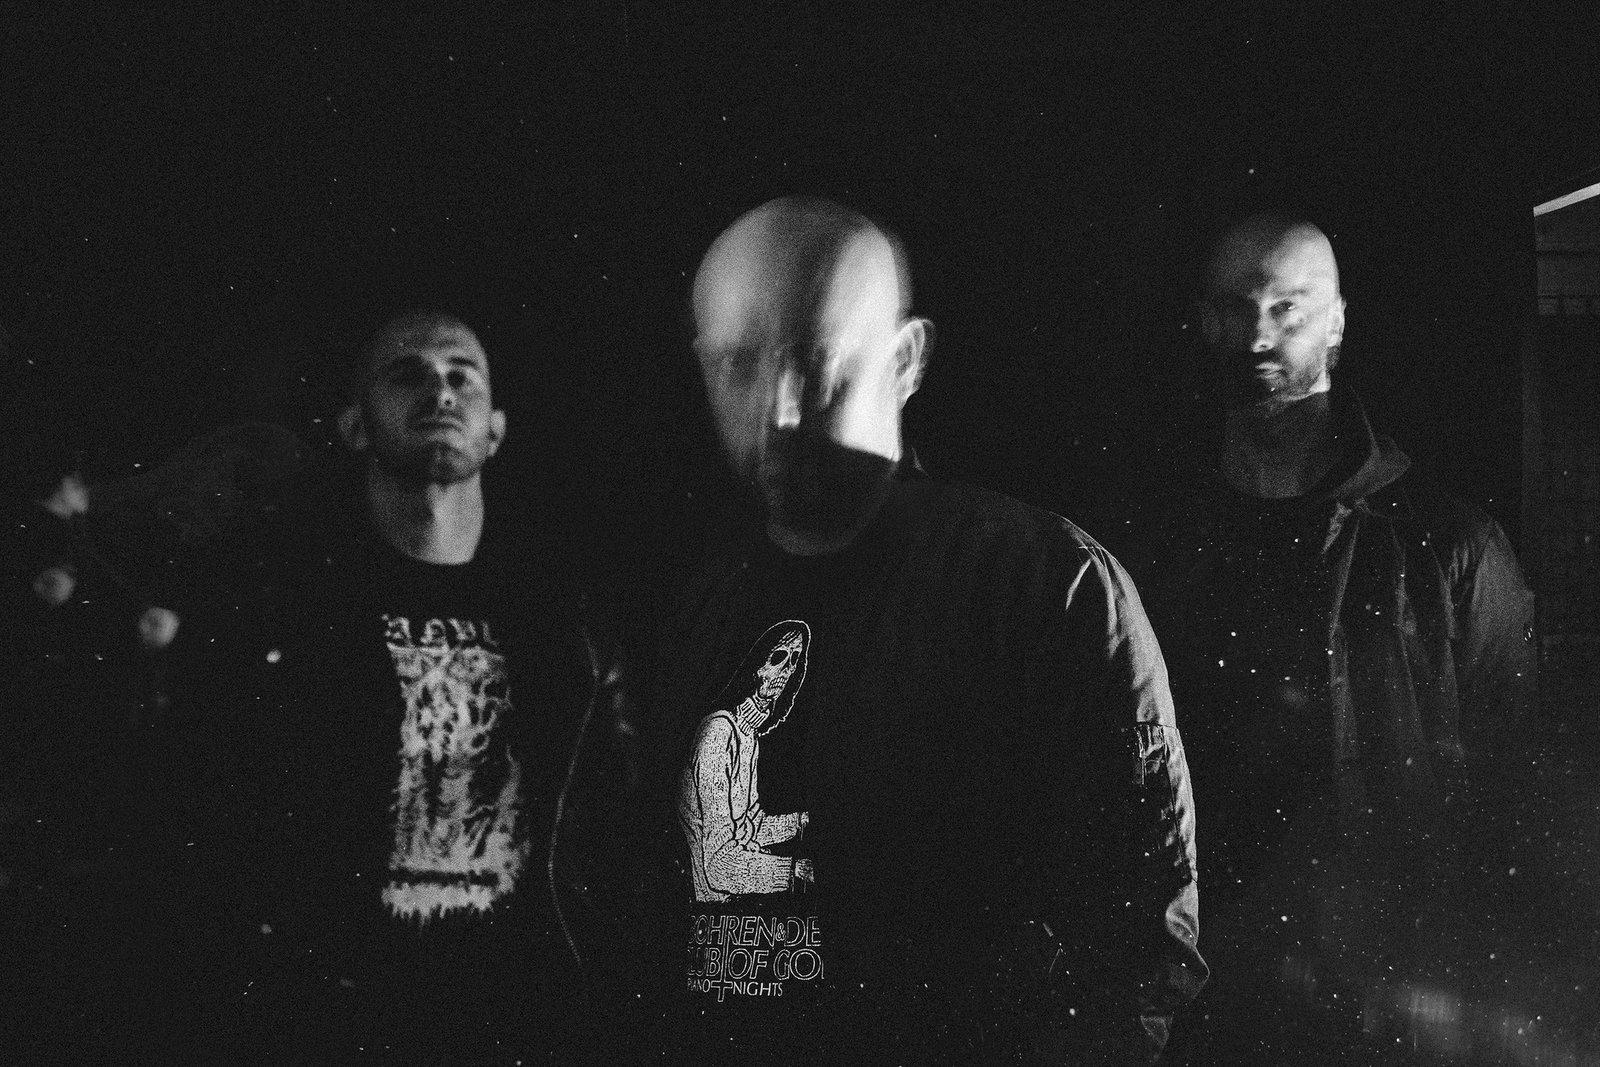 Ulcerate – “Cutting the Throat of God”